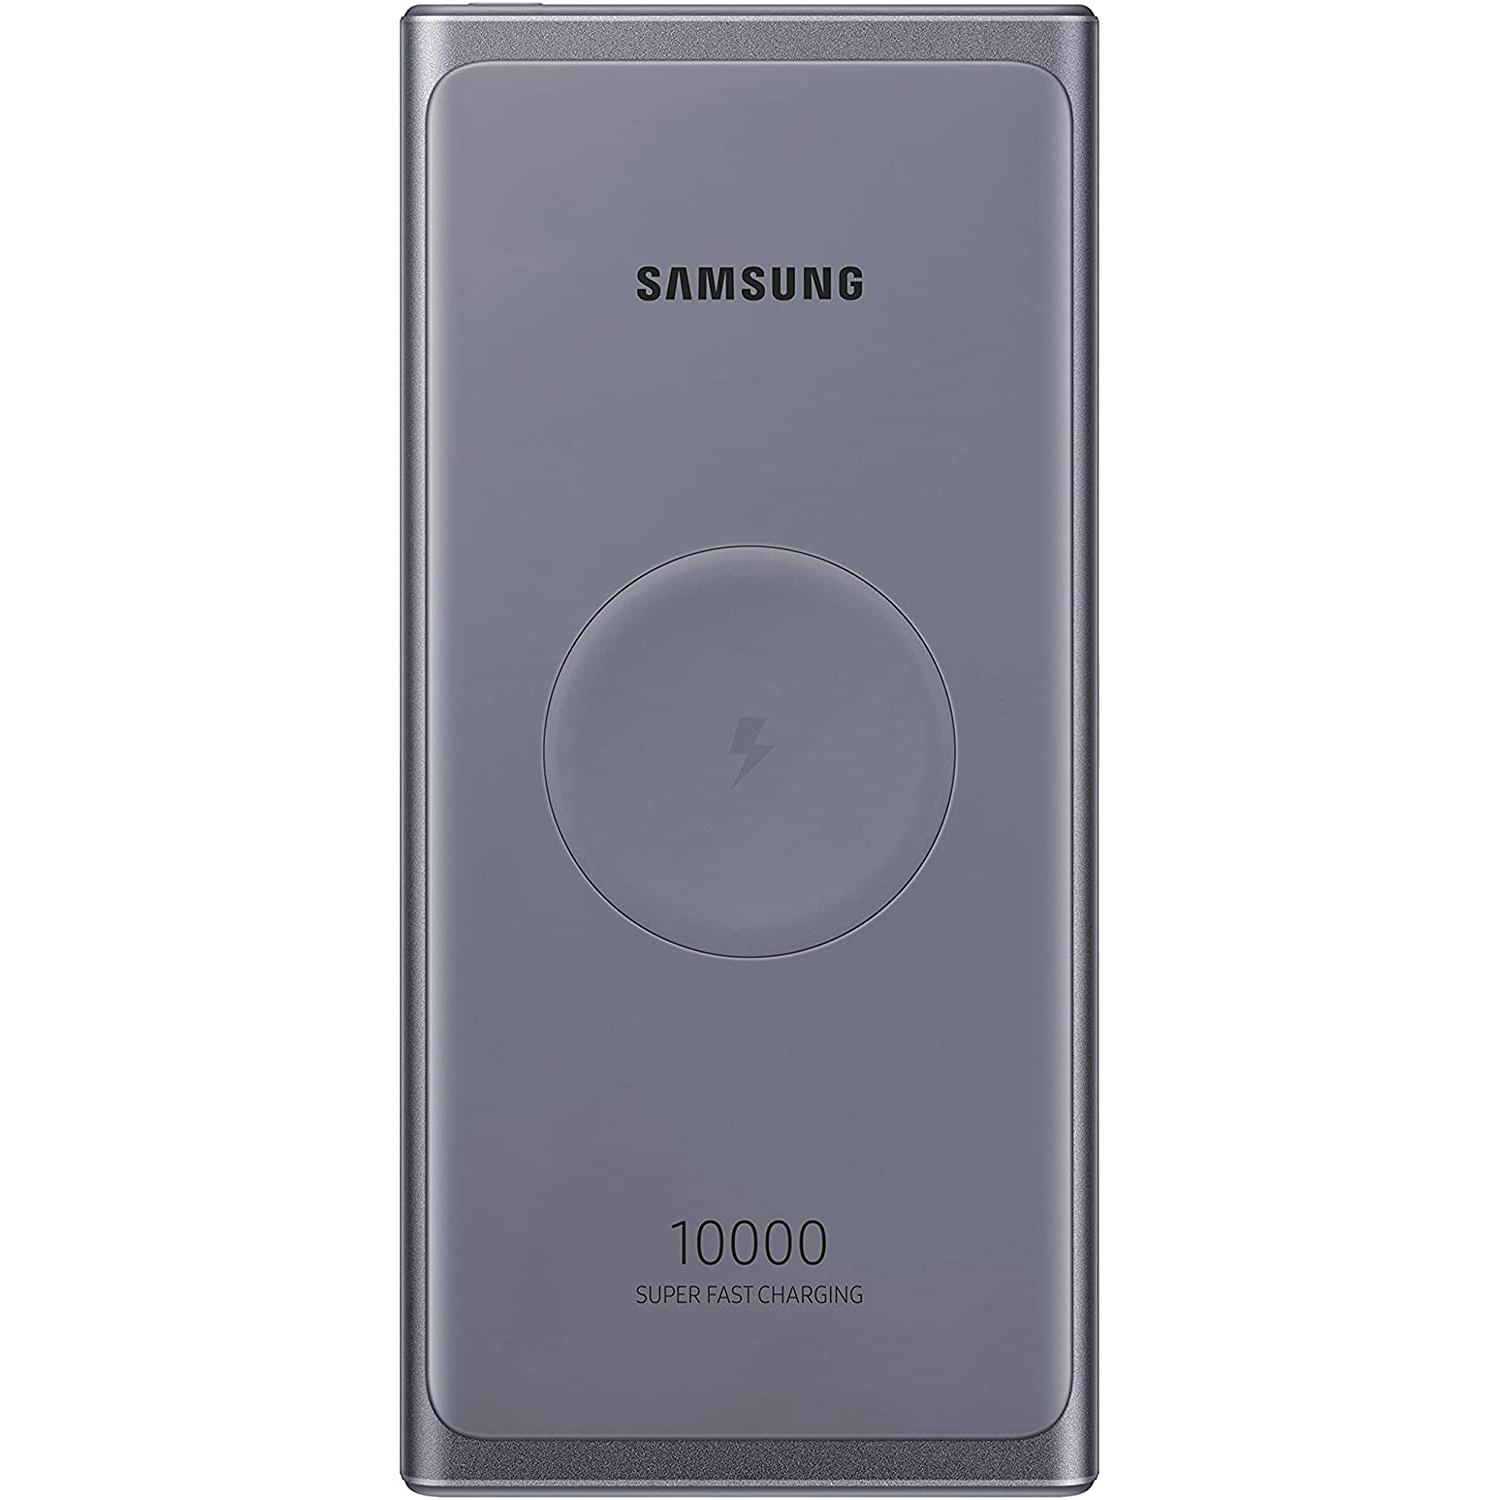 SAMSUNG 10,000 mAh Super Fast 25W Portable Wireless Charger Charger Battery Pack USB-C, Silver